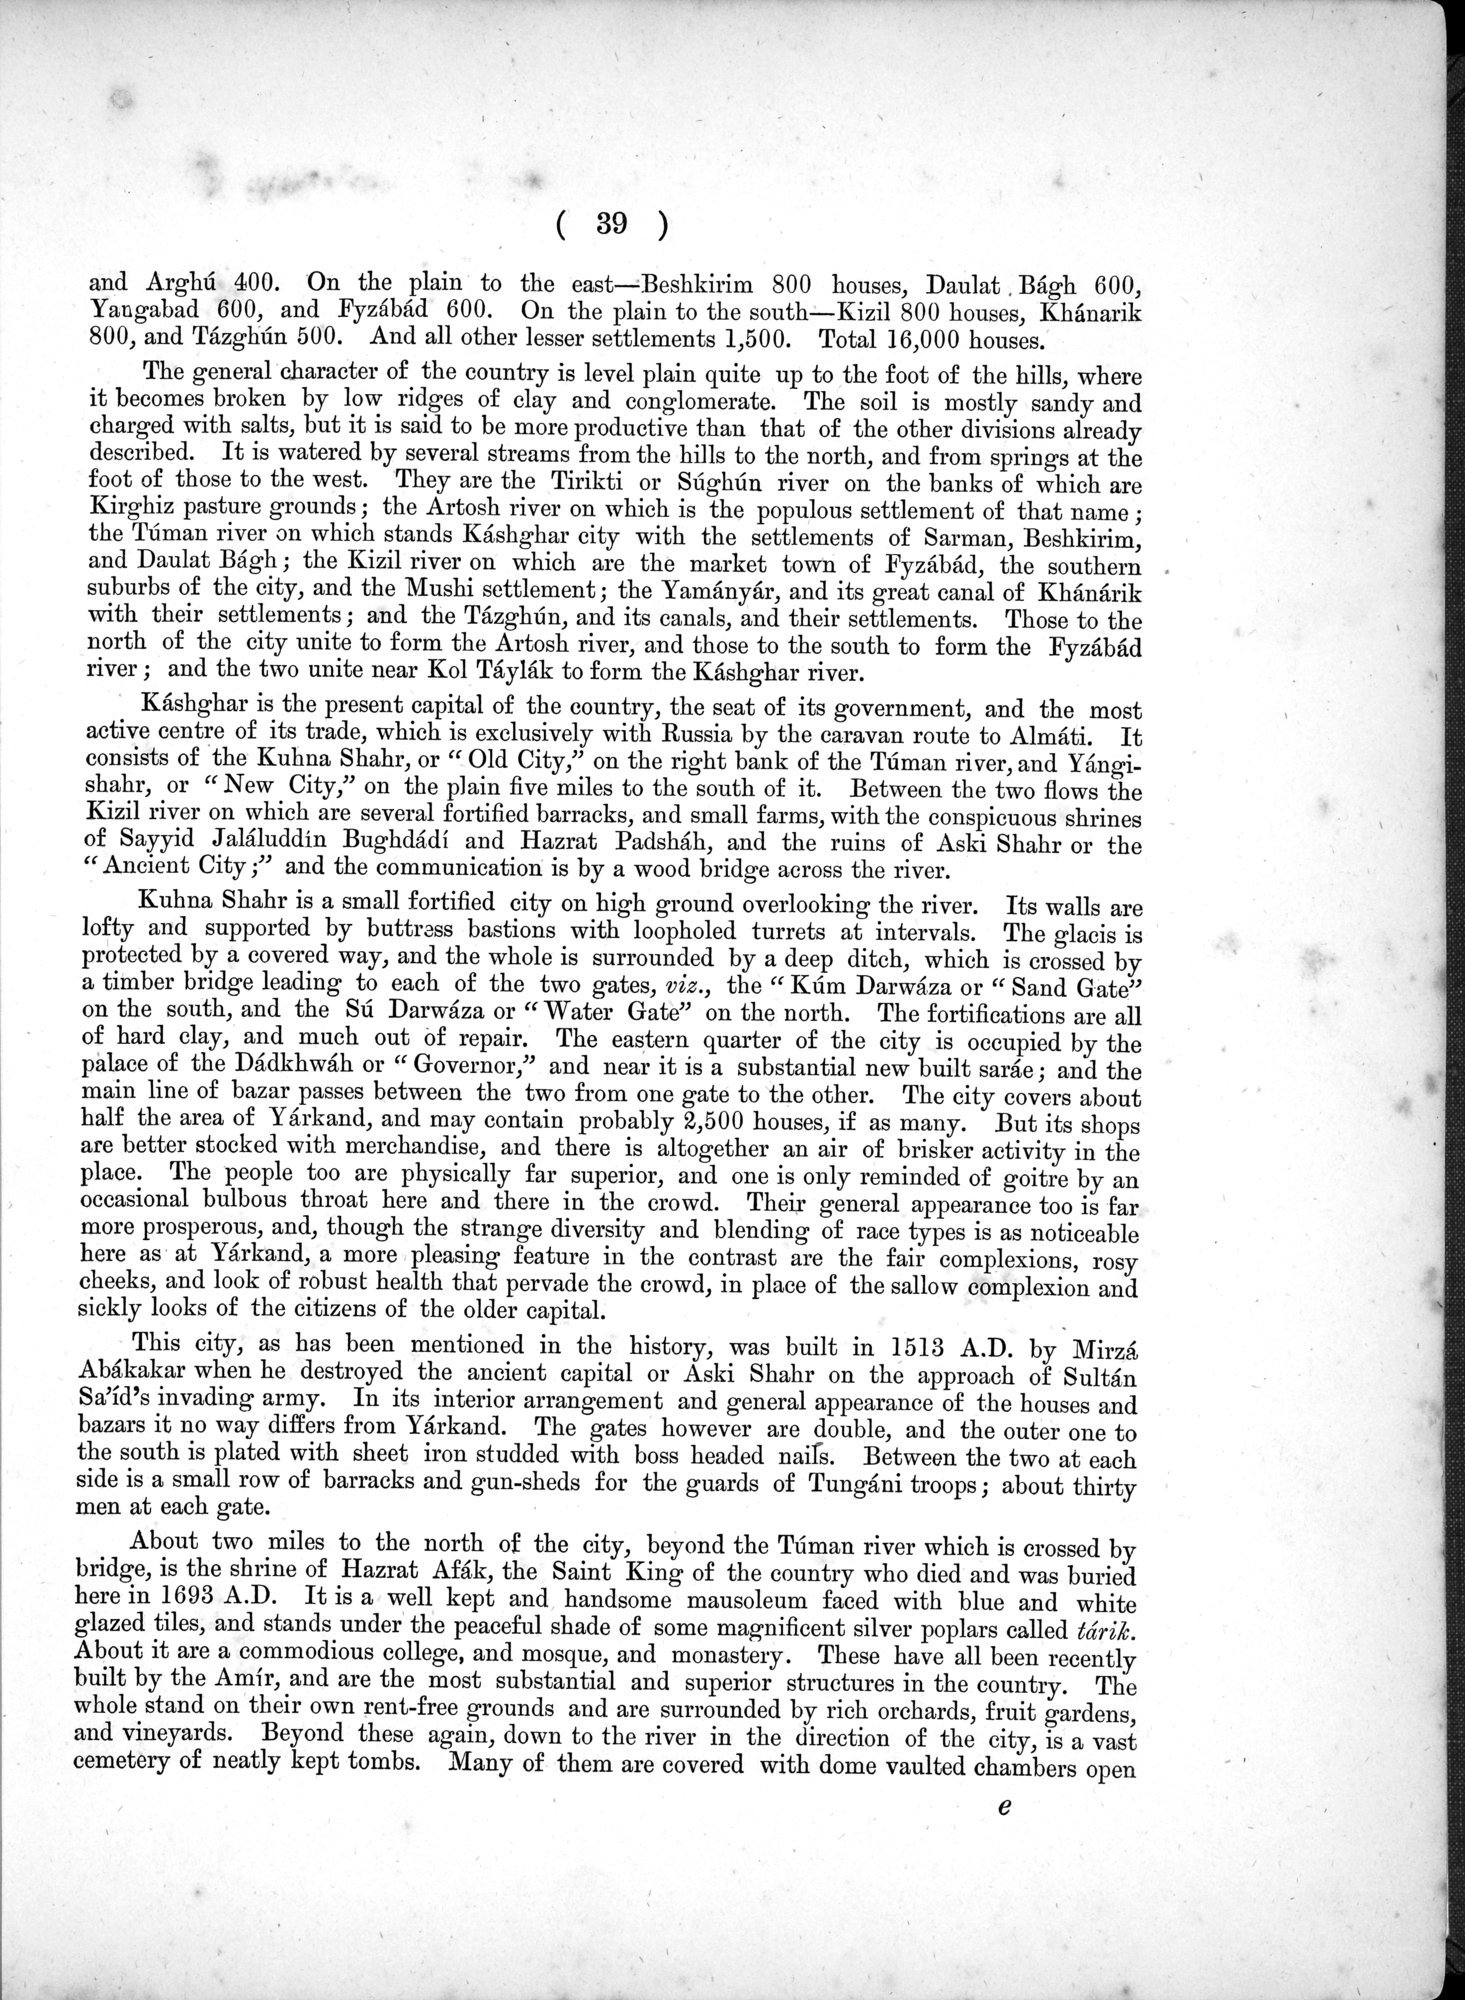 Report of a Mission to Yarkund in 1873 : vol.1 / Page 75 (Grayscale High Resolution Image)